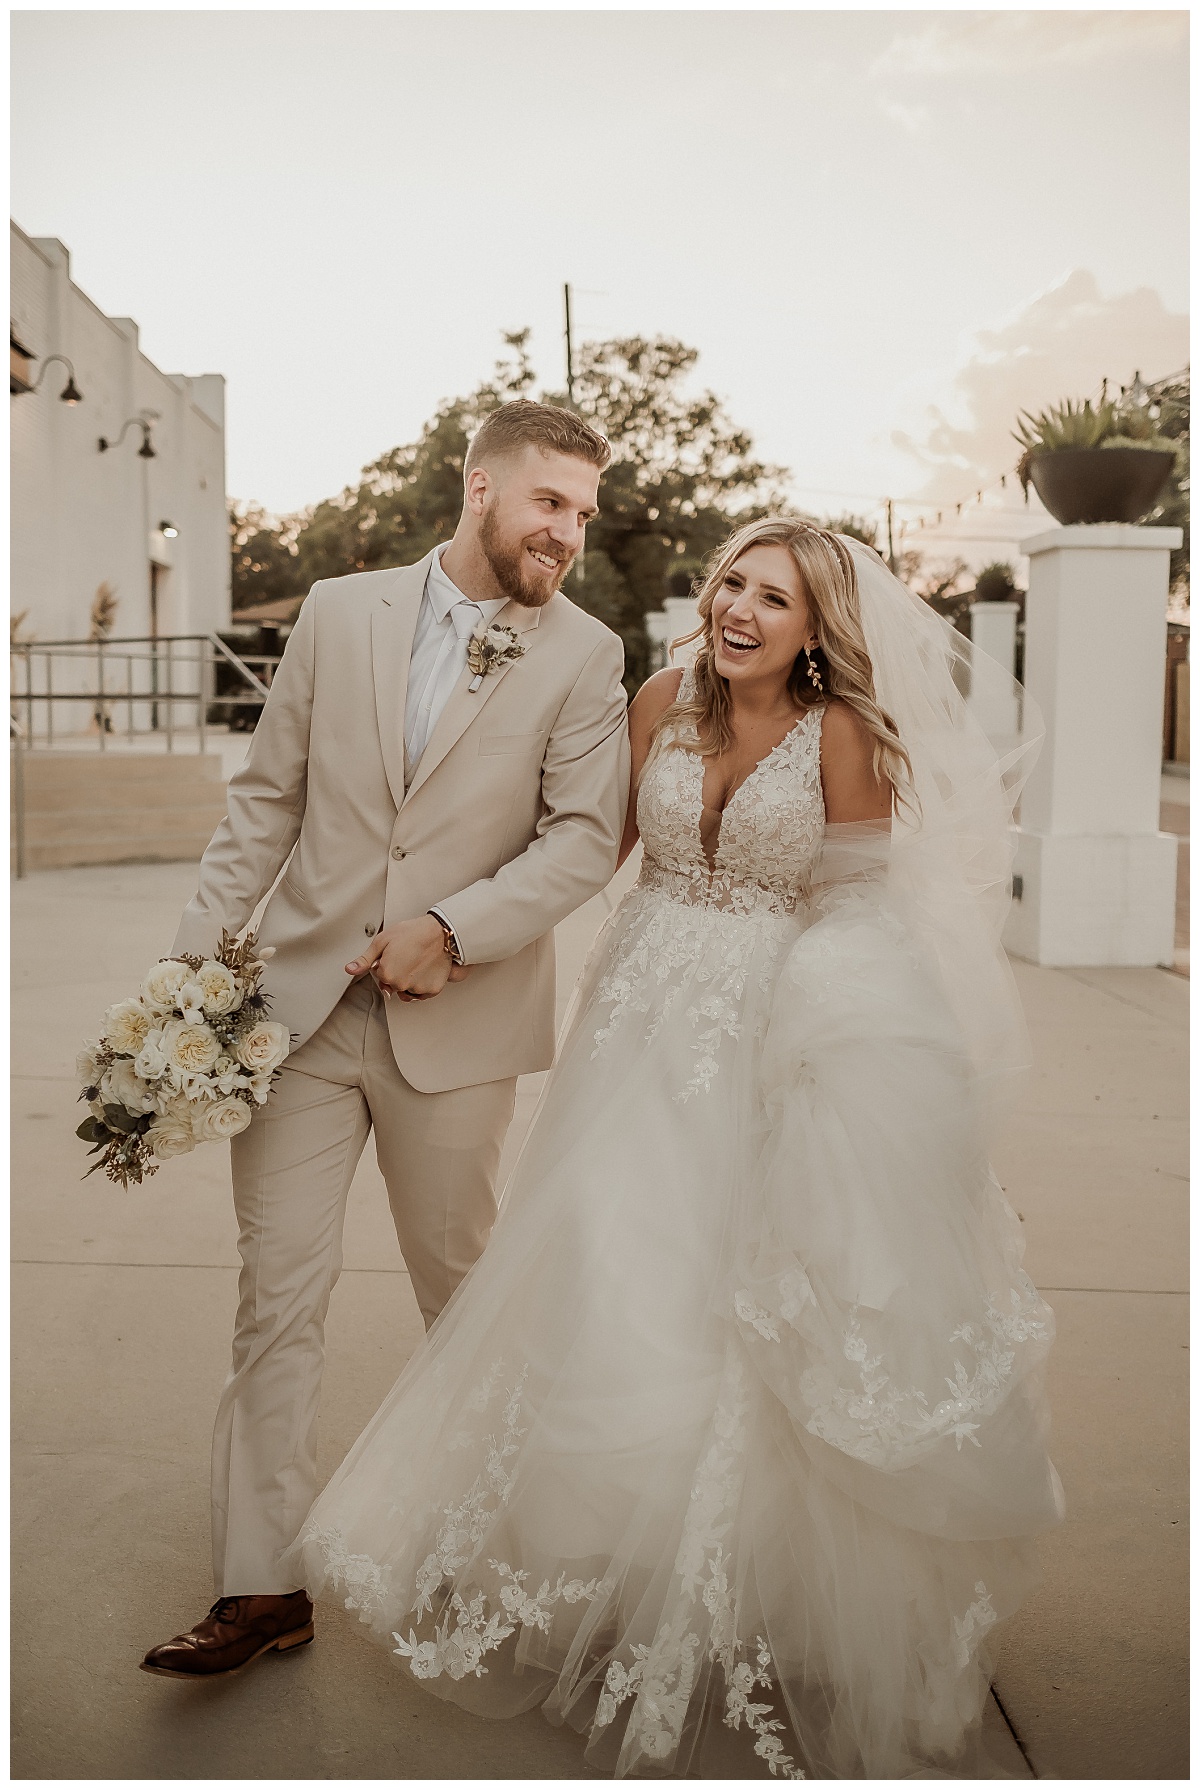 Bride and Groom walking, laughing and holding hands outside of Haus 820 for their industrial boho wedding at Haus 820 captured by Paisley Sunshine Weddings, a Tampa Wedding Photographer.